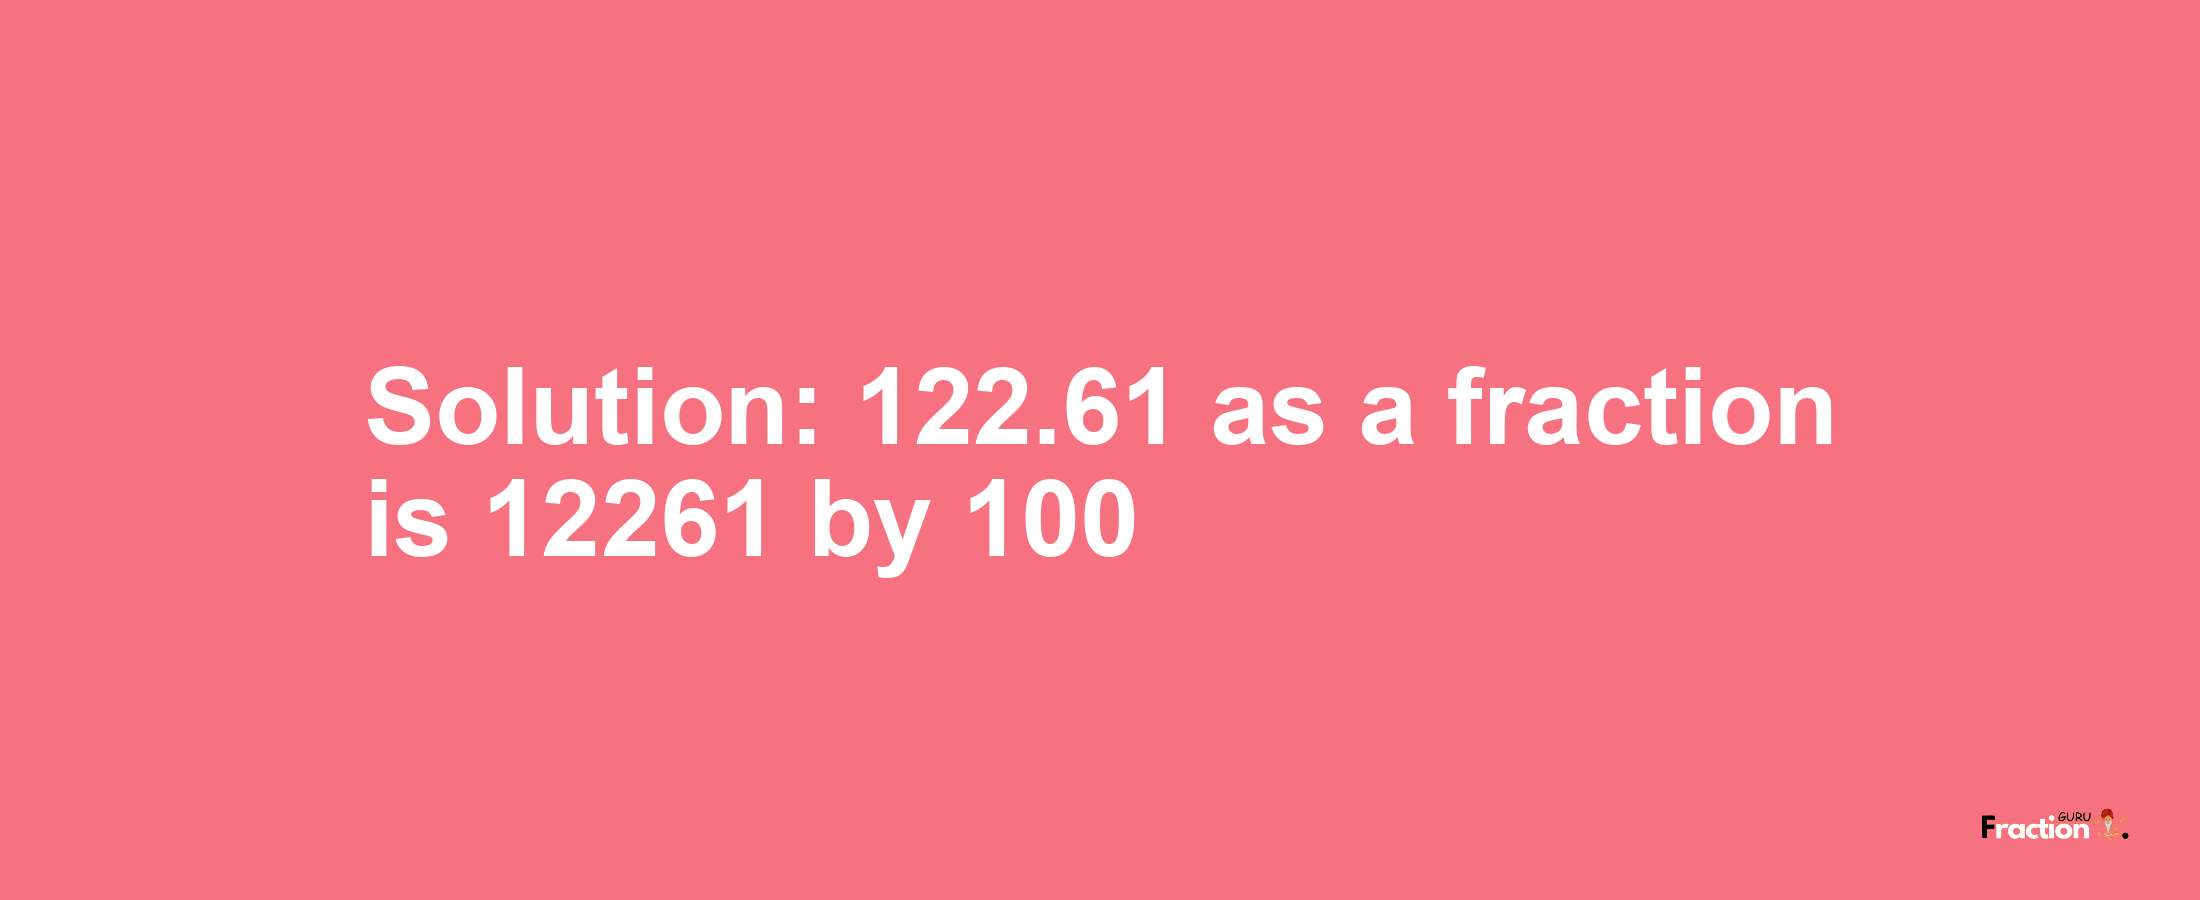 Solution:122.61 as a fraction is 12261/100